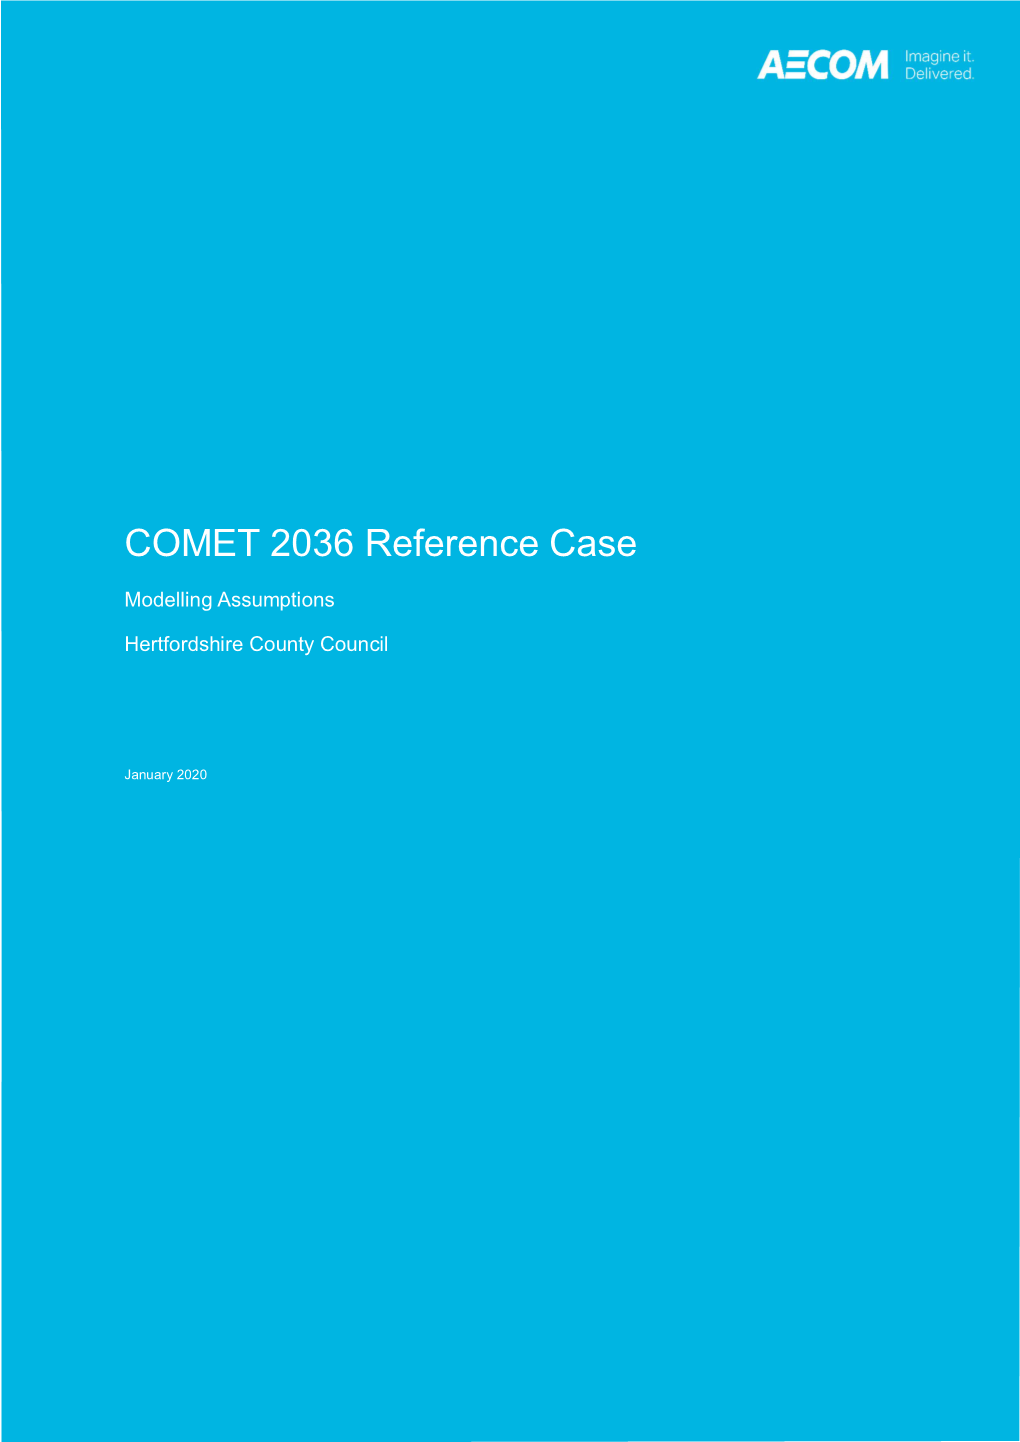 COMET 2036 Reference Case